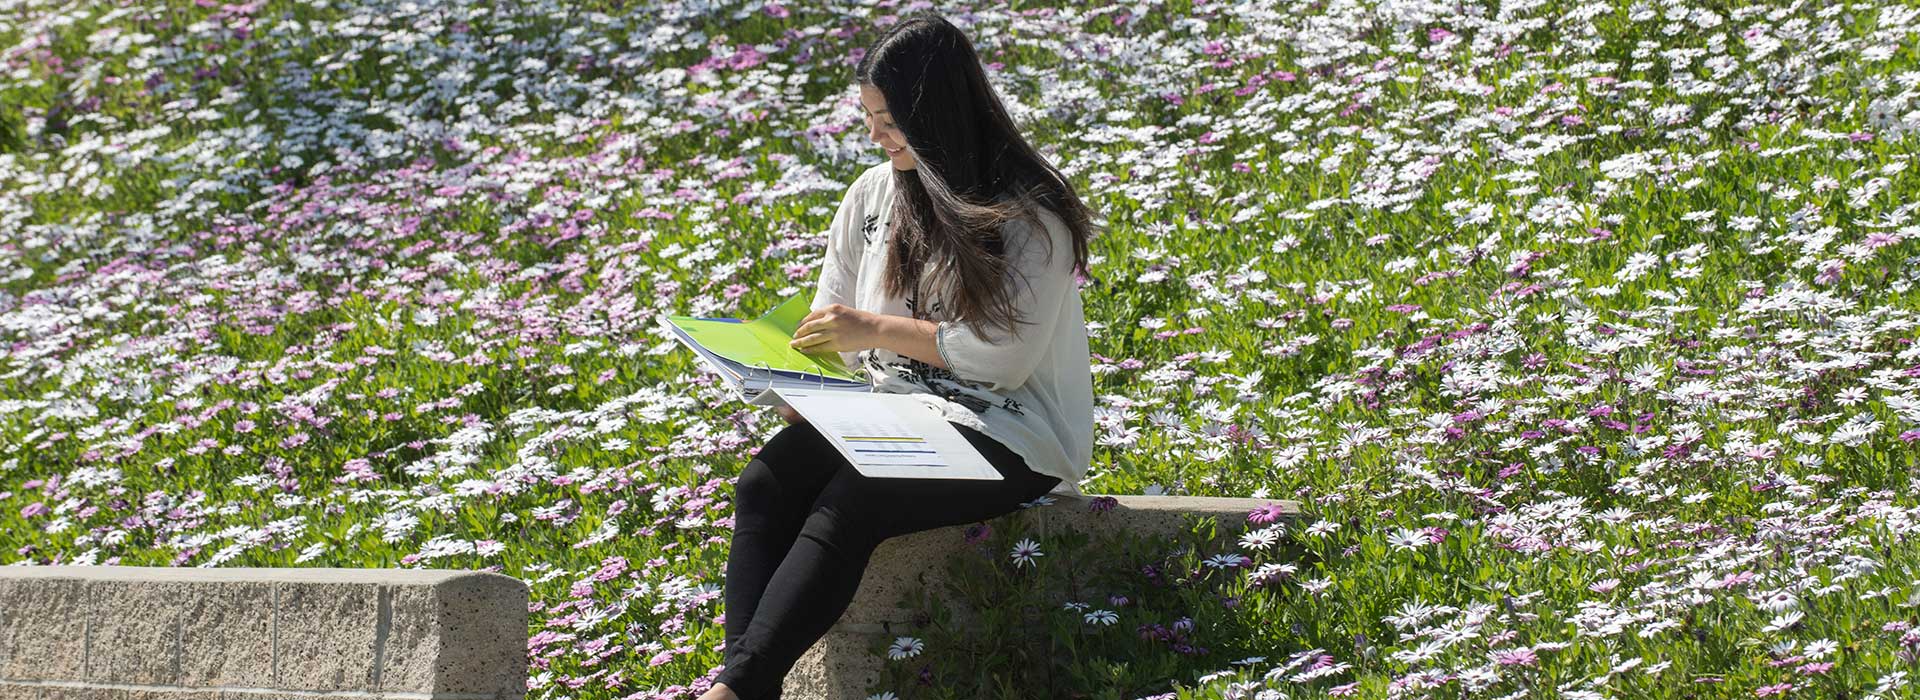 A female student sits among wildflowers